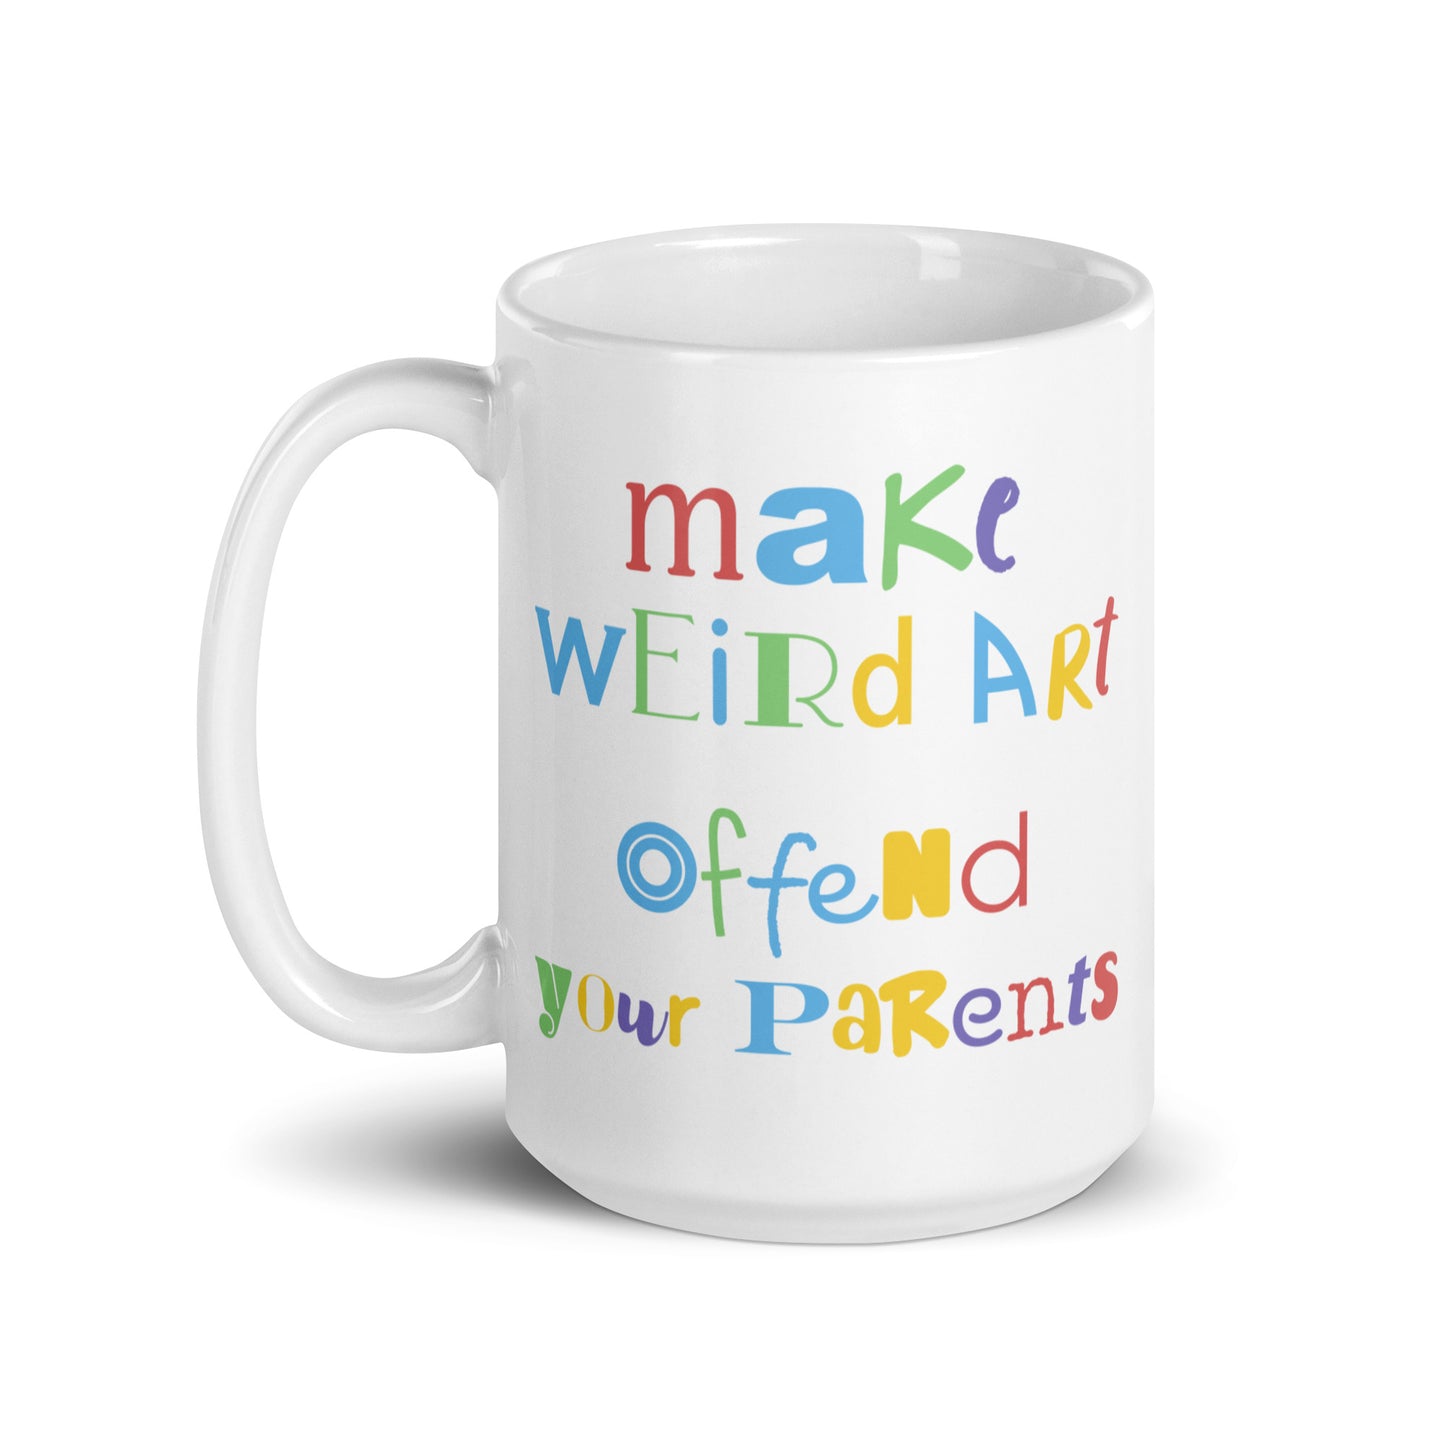 A 15 ounce white ceramic mug featuring text that reads "make weird art, offend your parents" in varying fonts and colors